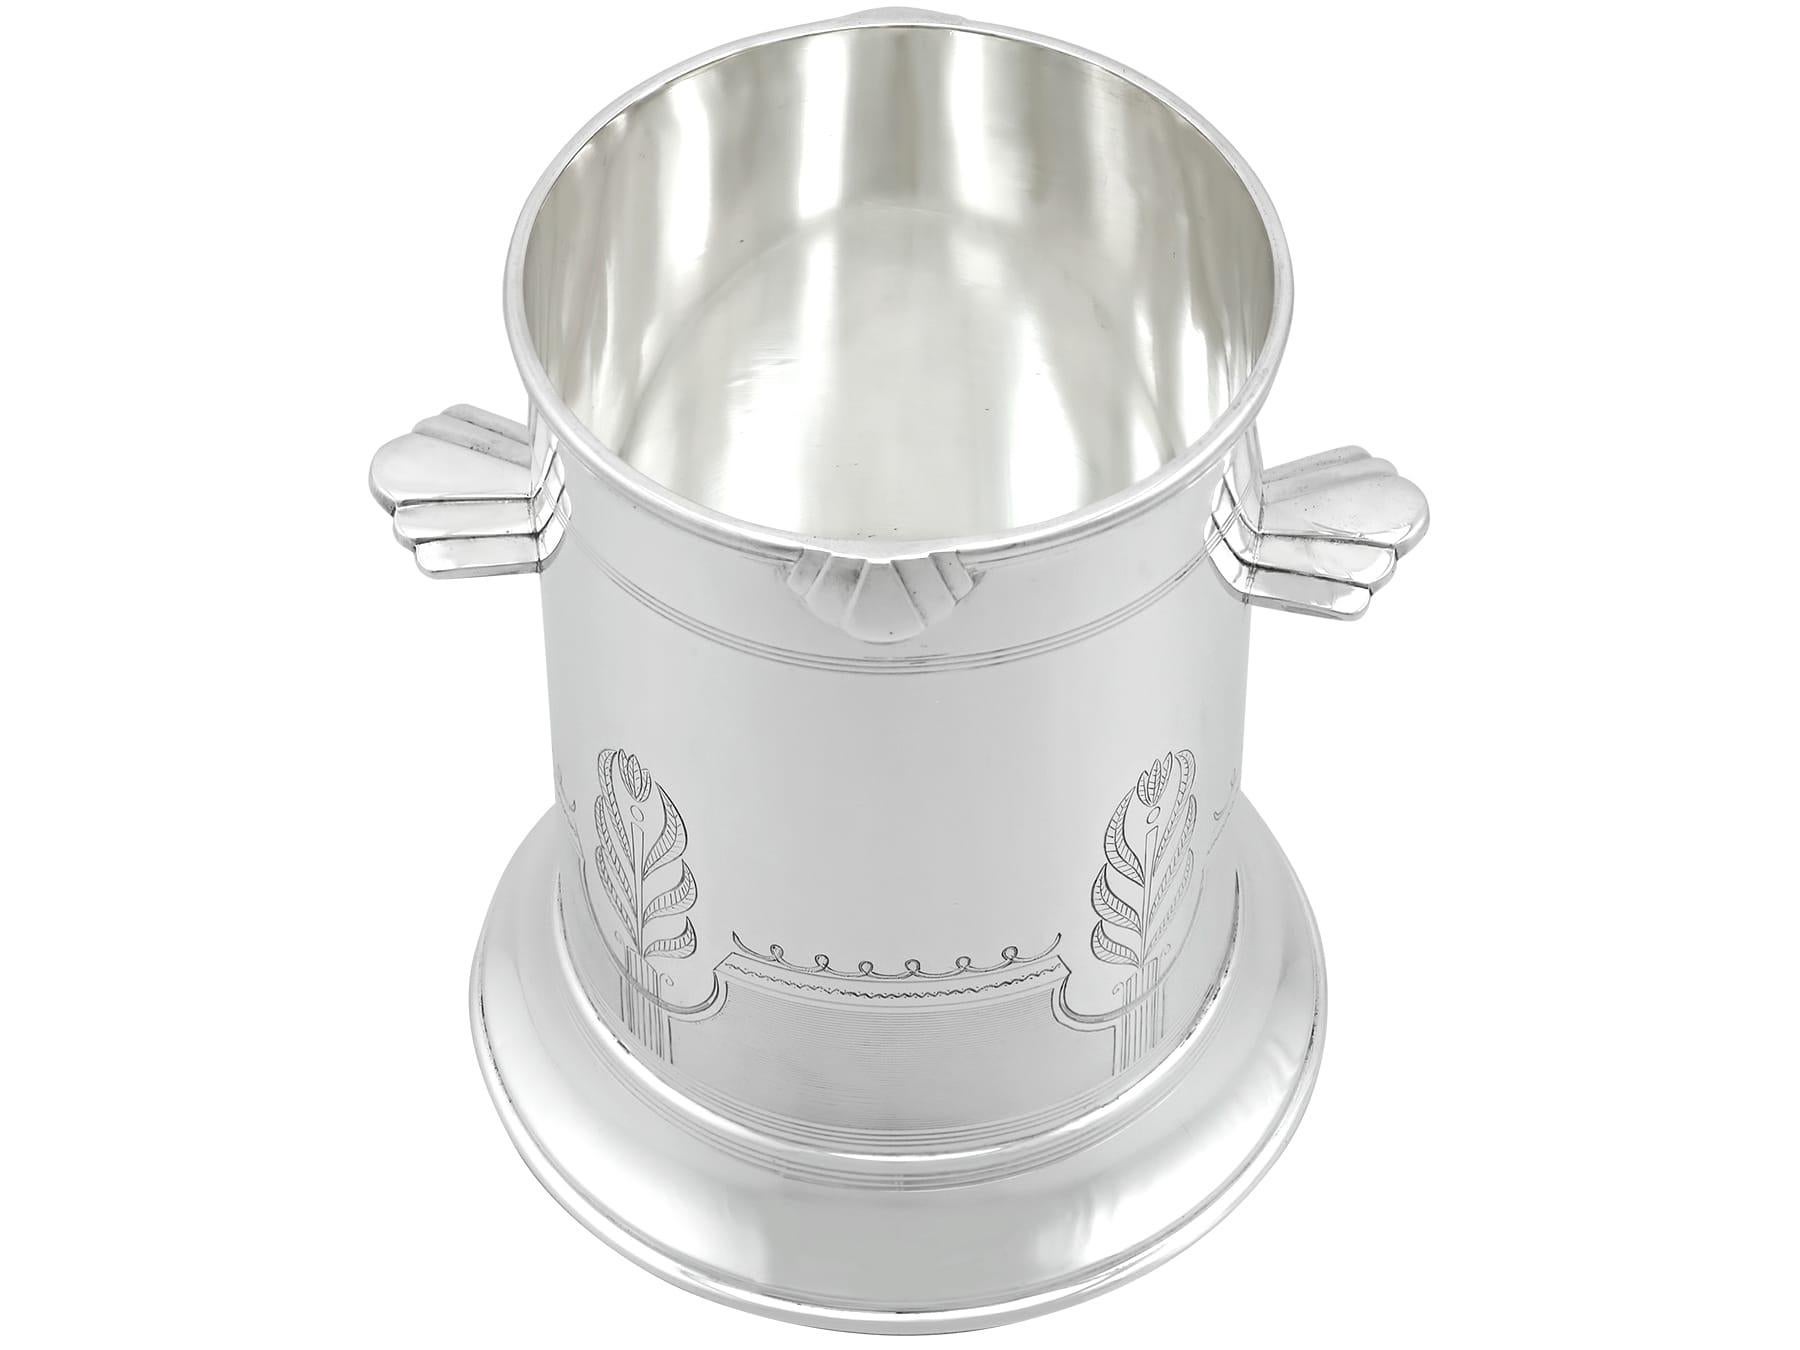 An exceptional, fine and impressive vintage George VI English sterling silver Art Deco bottle coaster; an addition to our ornamental silverware collection

This exceptional vintage George VI sterling silver coaster has a plain cylindrical form to